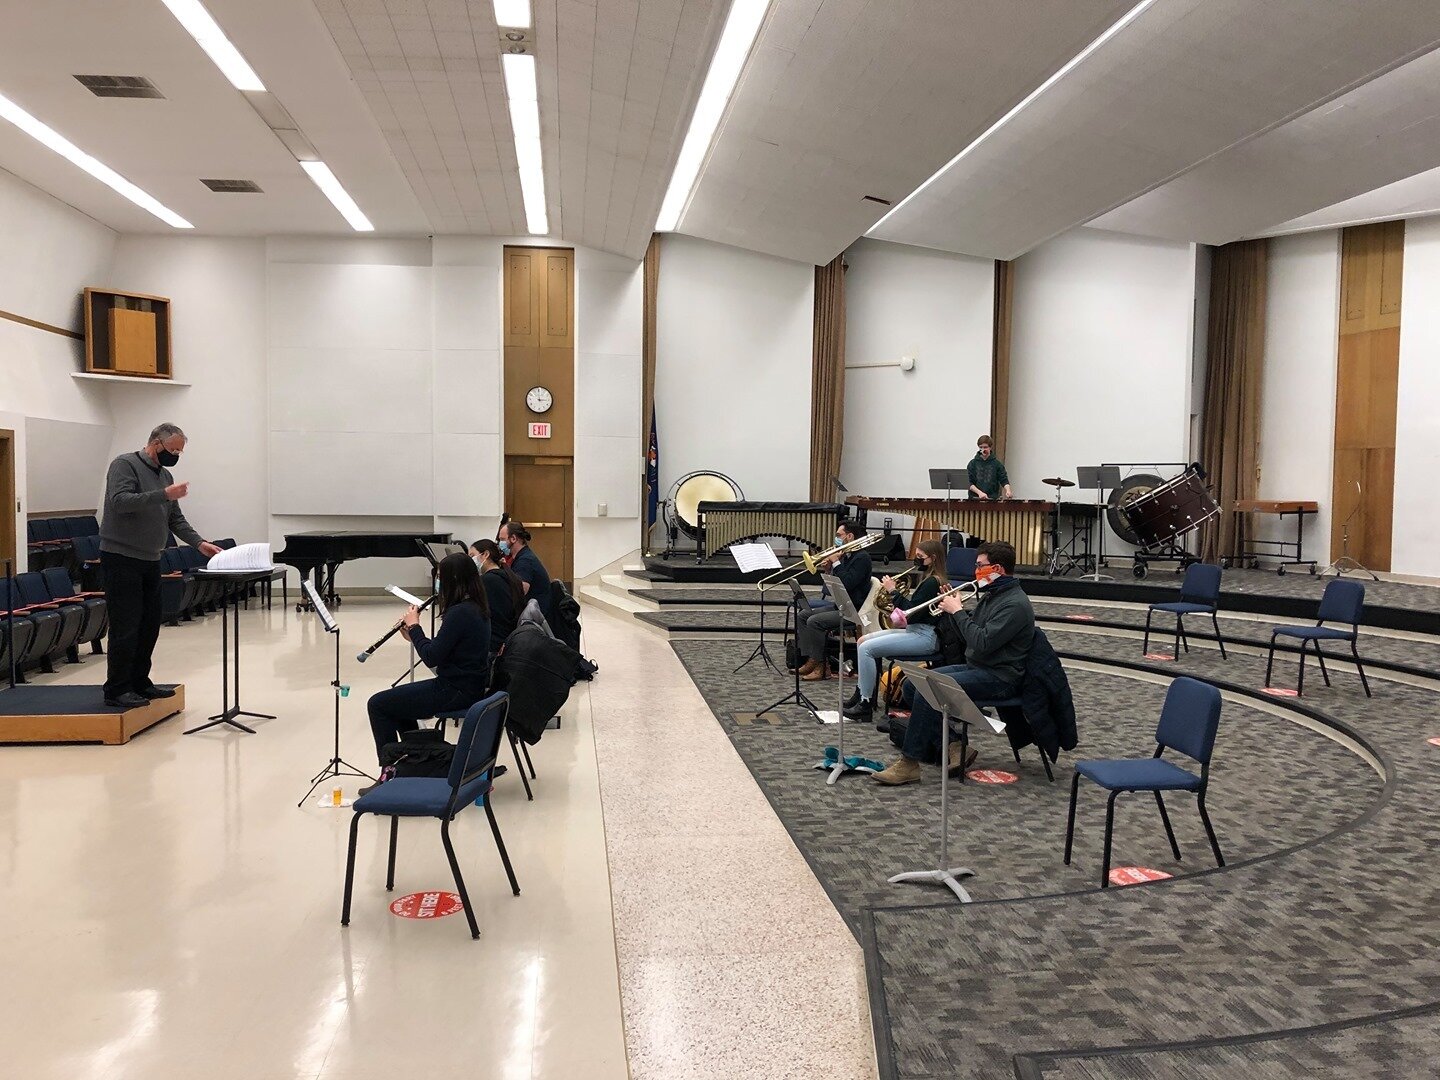 The Illinois Wind Symphony has been preparing &quot;Ba Yin&quot; by Chinese-American composer Chen Yi which was written for saxophone quartet and wind ensemble. Dr. Peterson can be seen leading members of the wind ensemble prior to combining with the